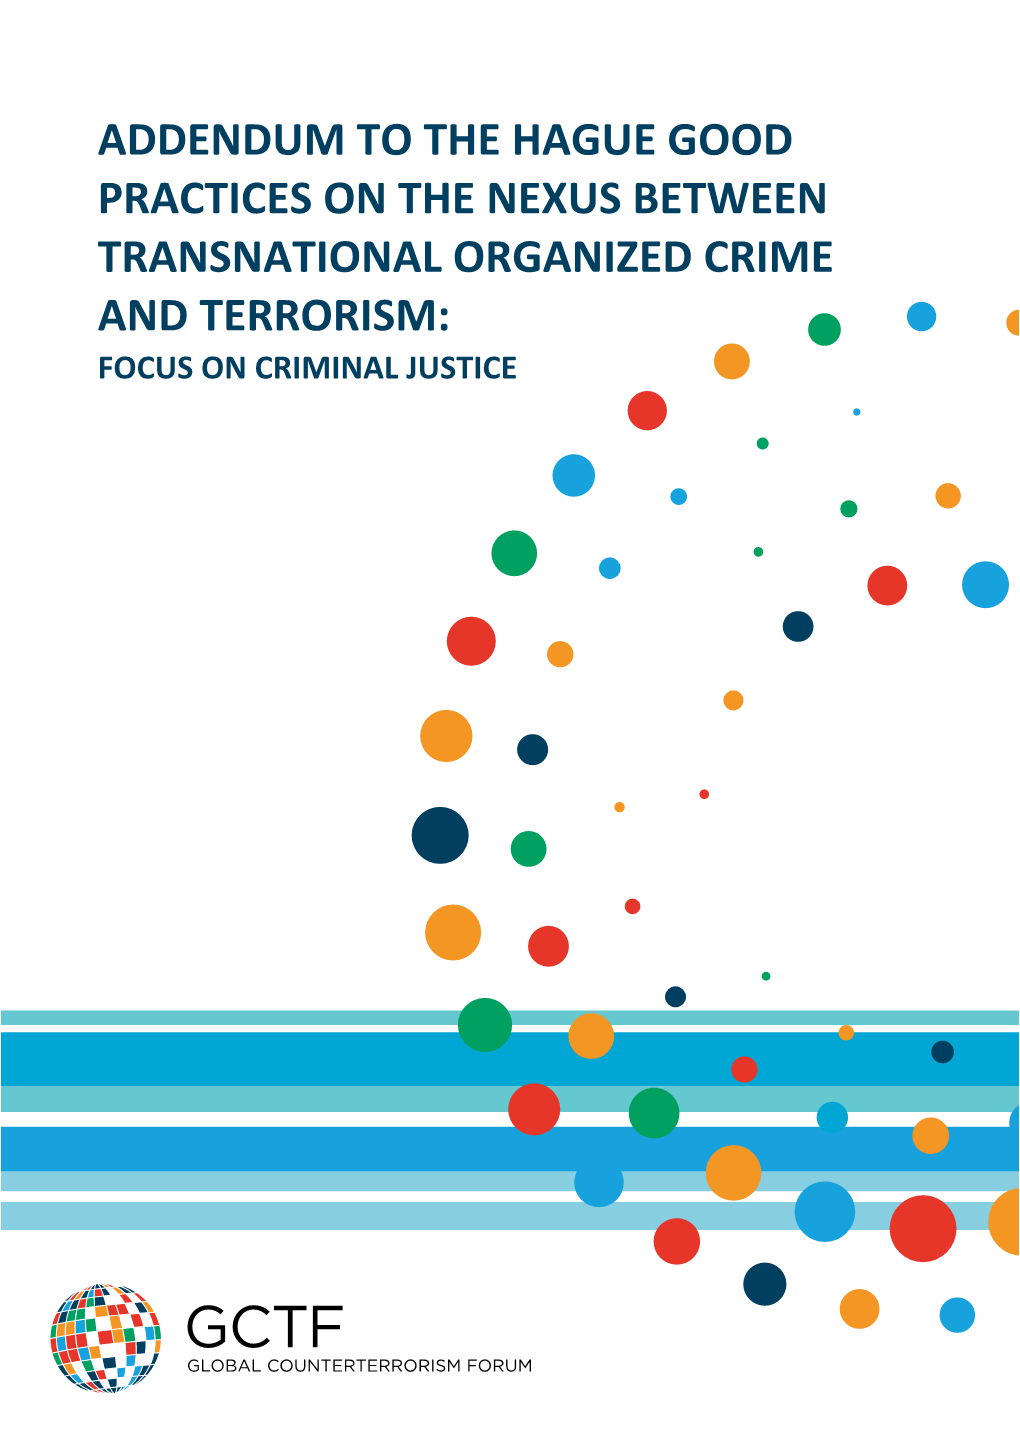 Addendum to the Hague Good Practices on the Nexus Between Transnational Organized Crime and Terrorism: Focus on Criminal Justice